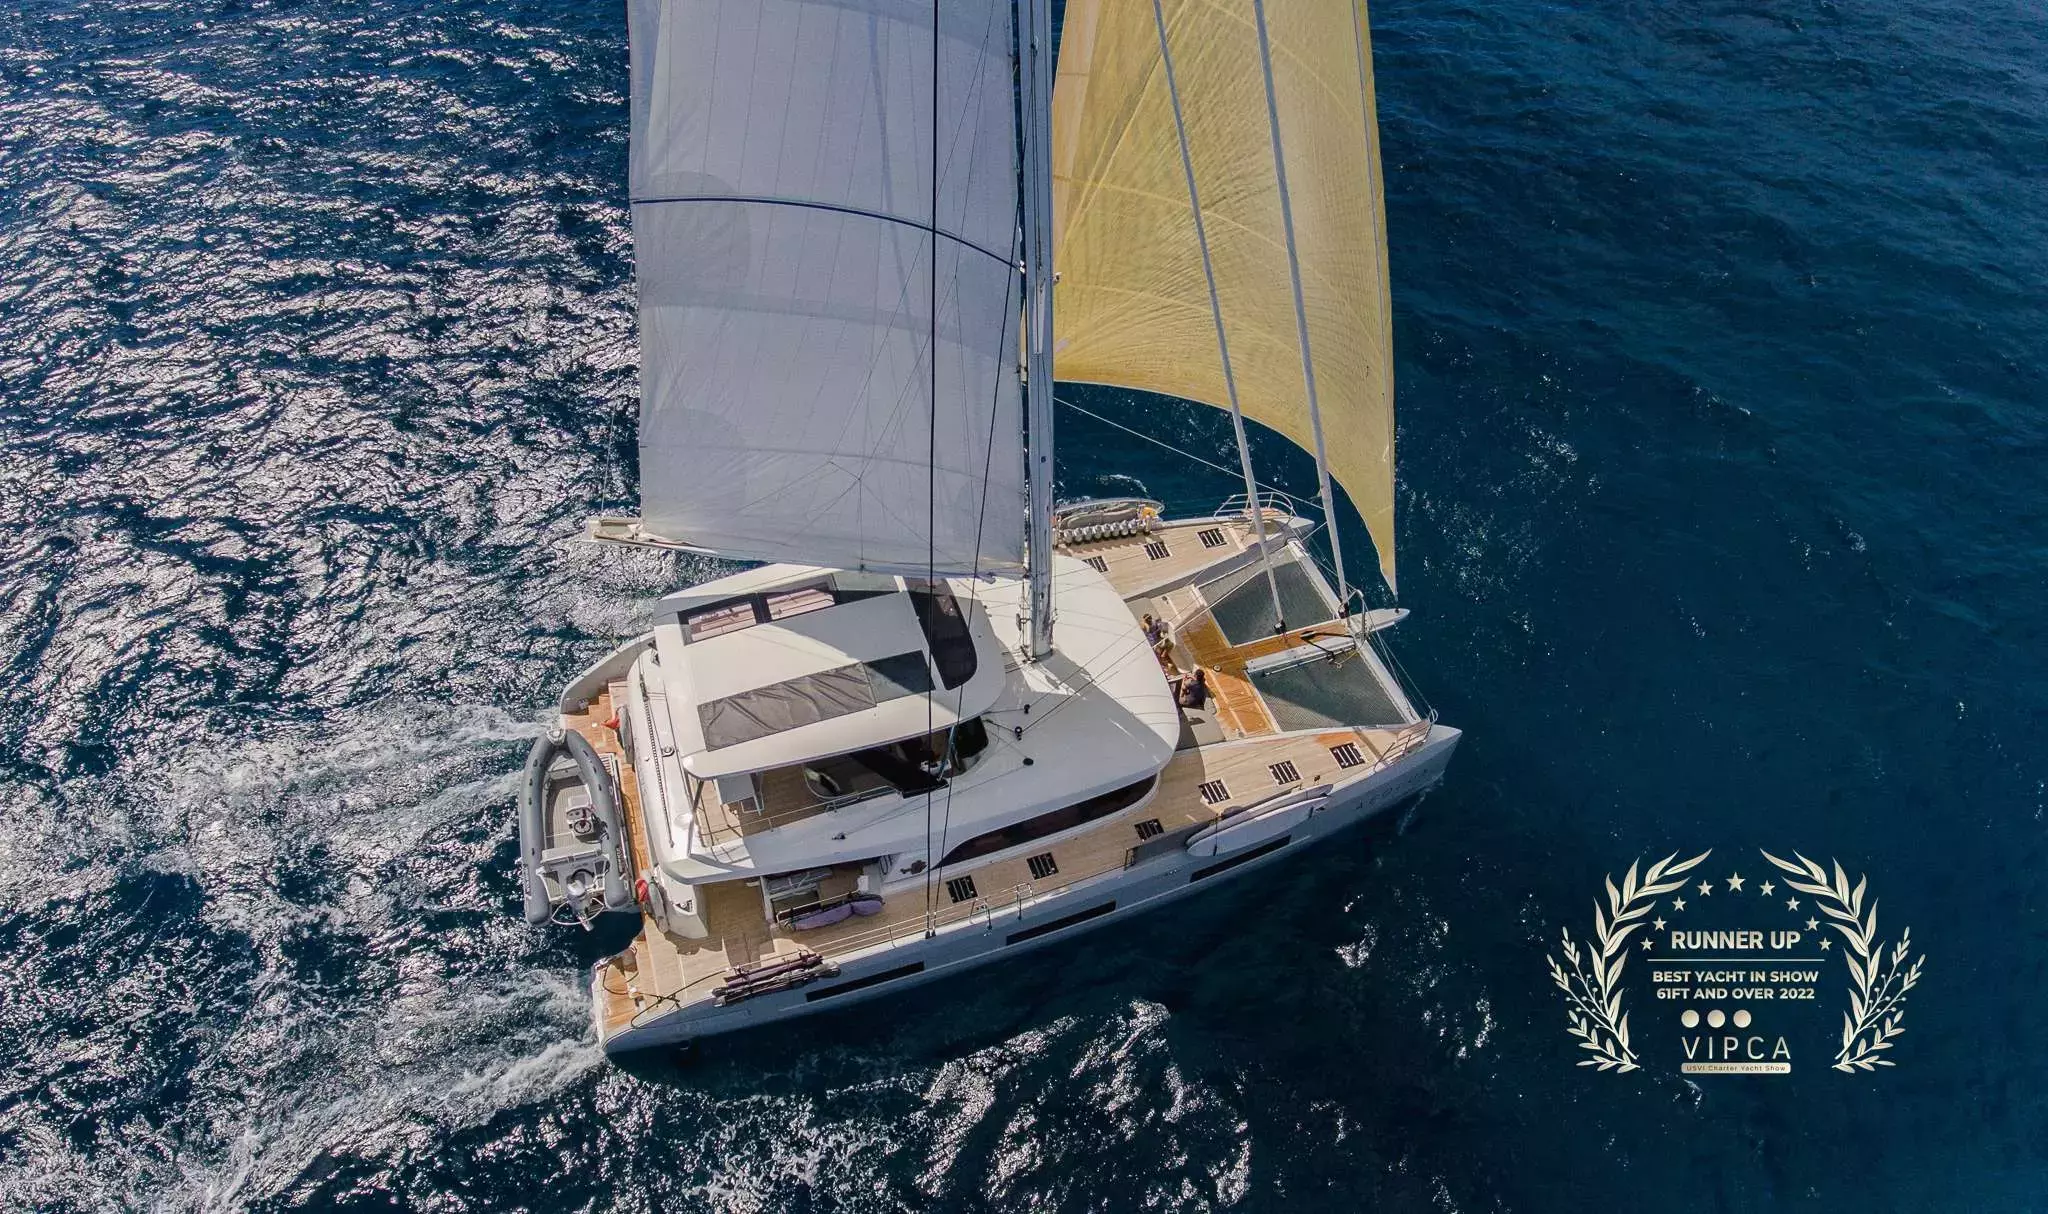 Aeolus by Lagoon - Top rates for a Charter of a private Luxury Catamaran in St Martin